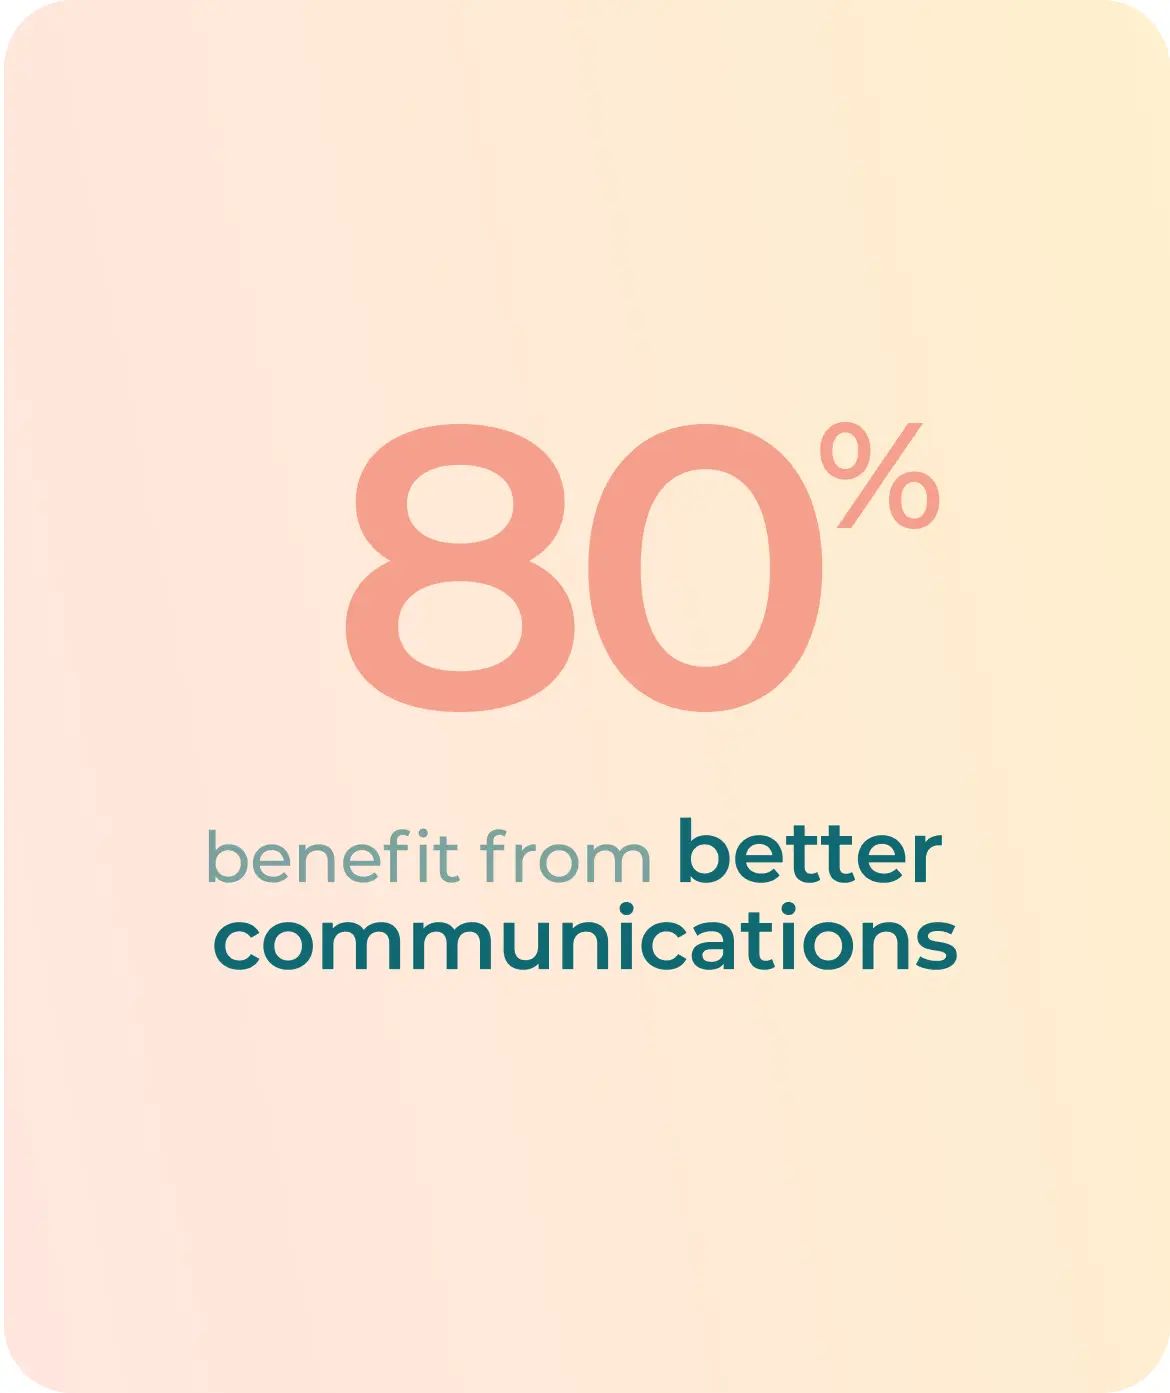 80% benefit from better communications